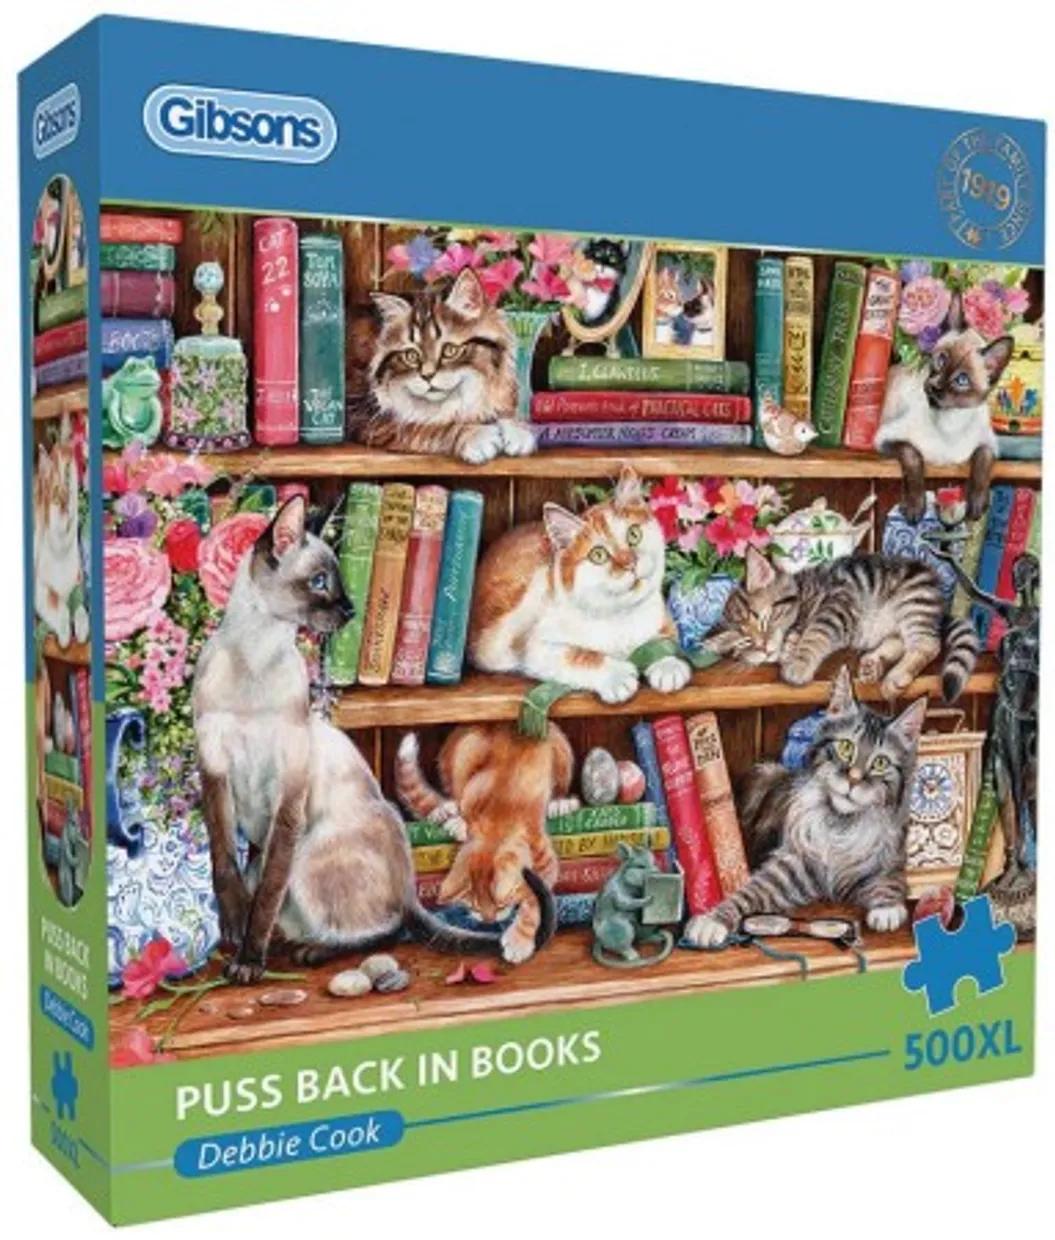 Puzzel - Puss Back in Books (500XL)